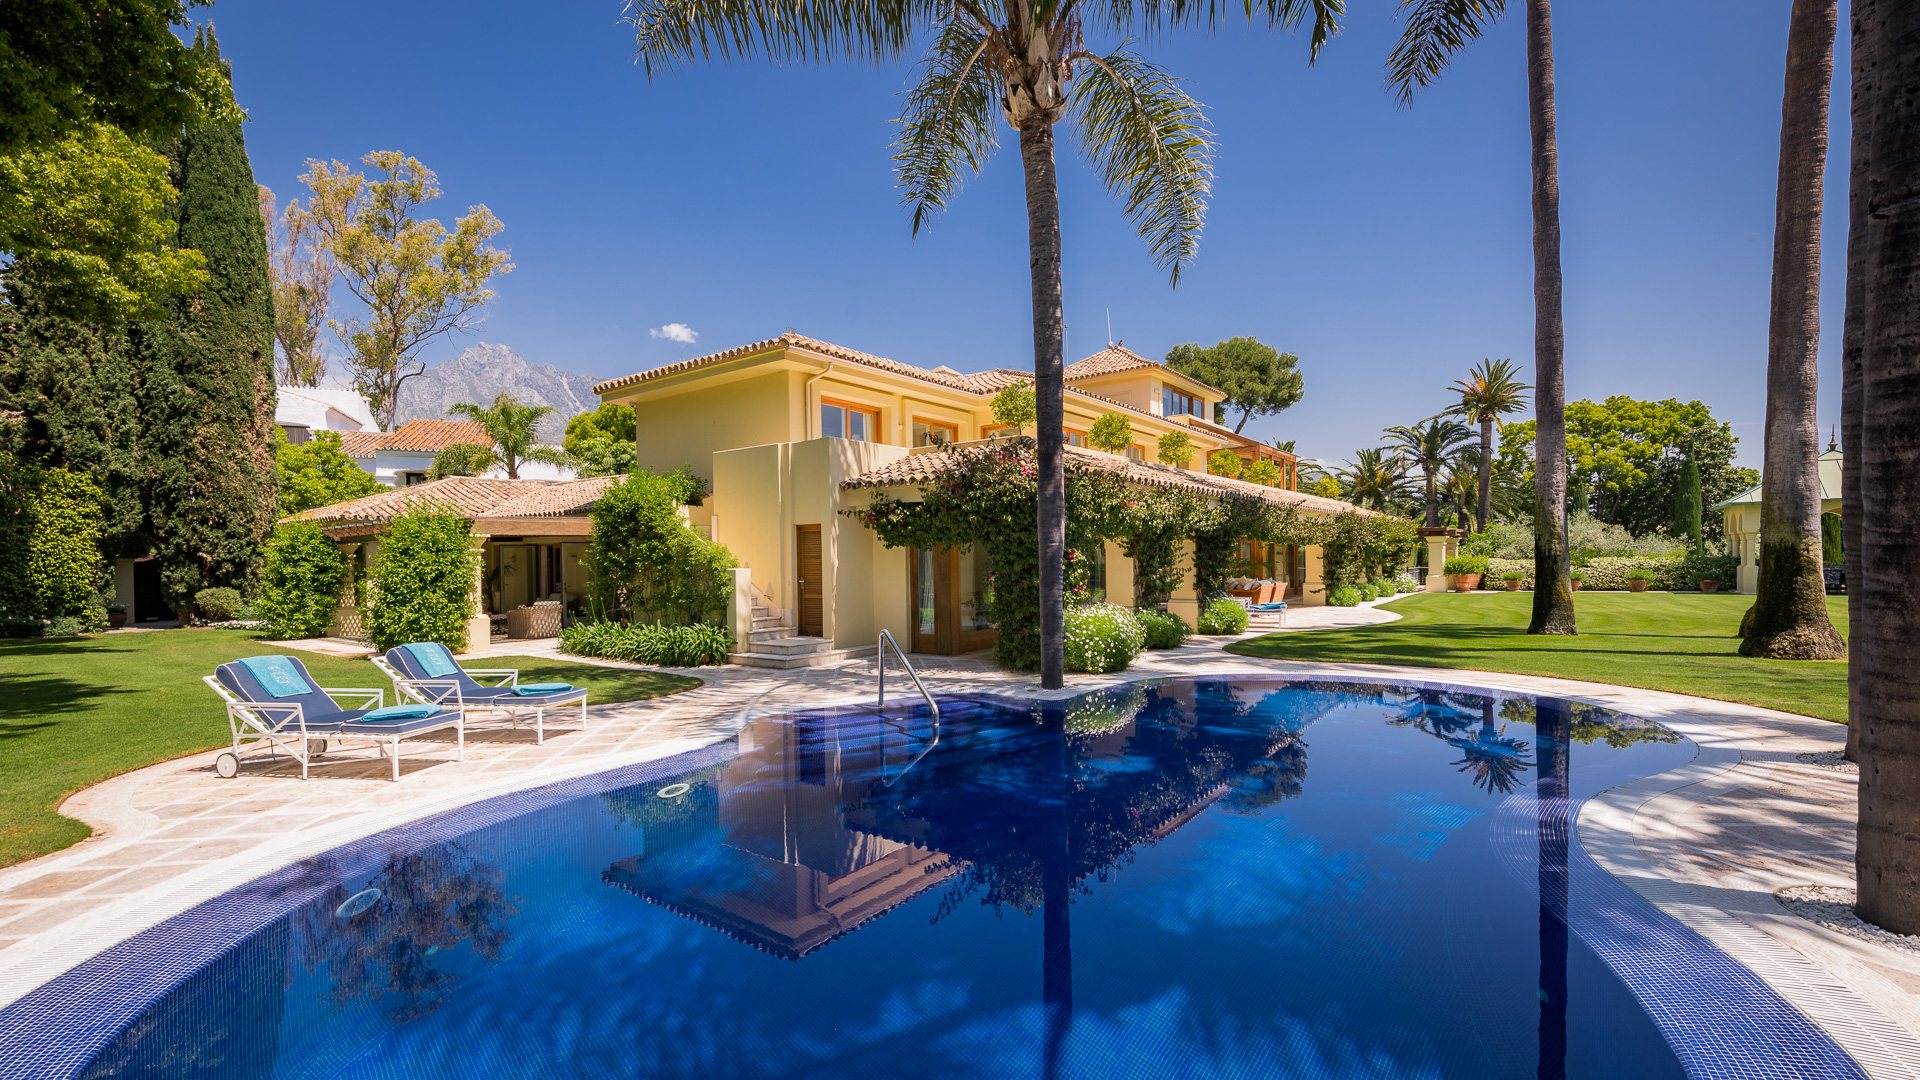 Selling Sunsets present the epitome of Luxury - a beachside 9 bedroom villa for holiday rental